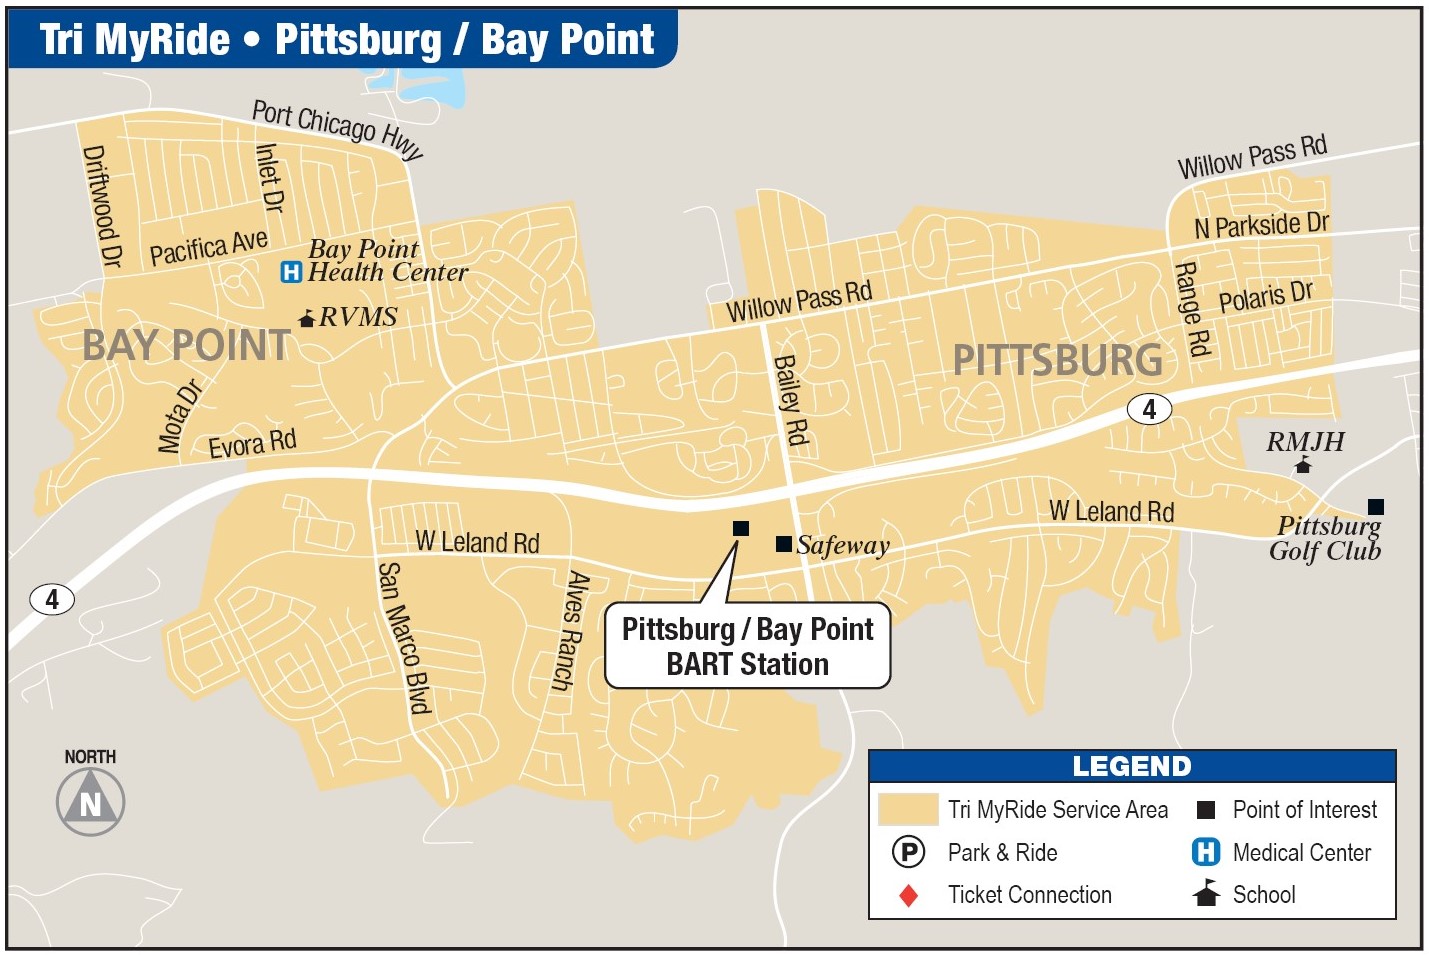 Pittsburg/Baypoint Service area map.